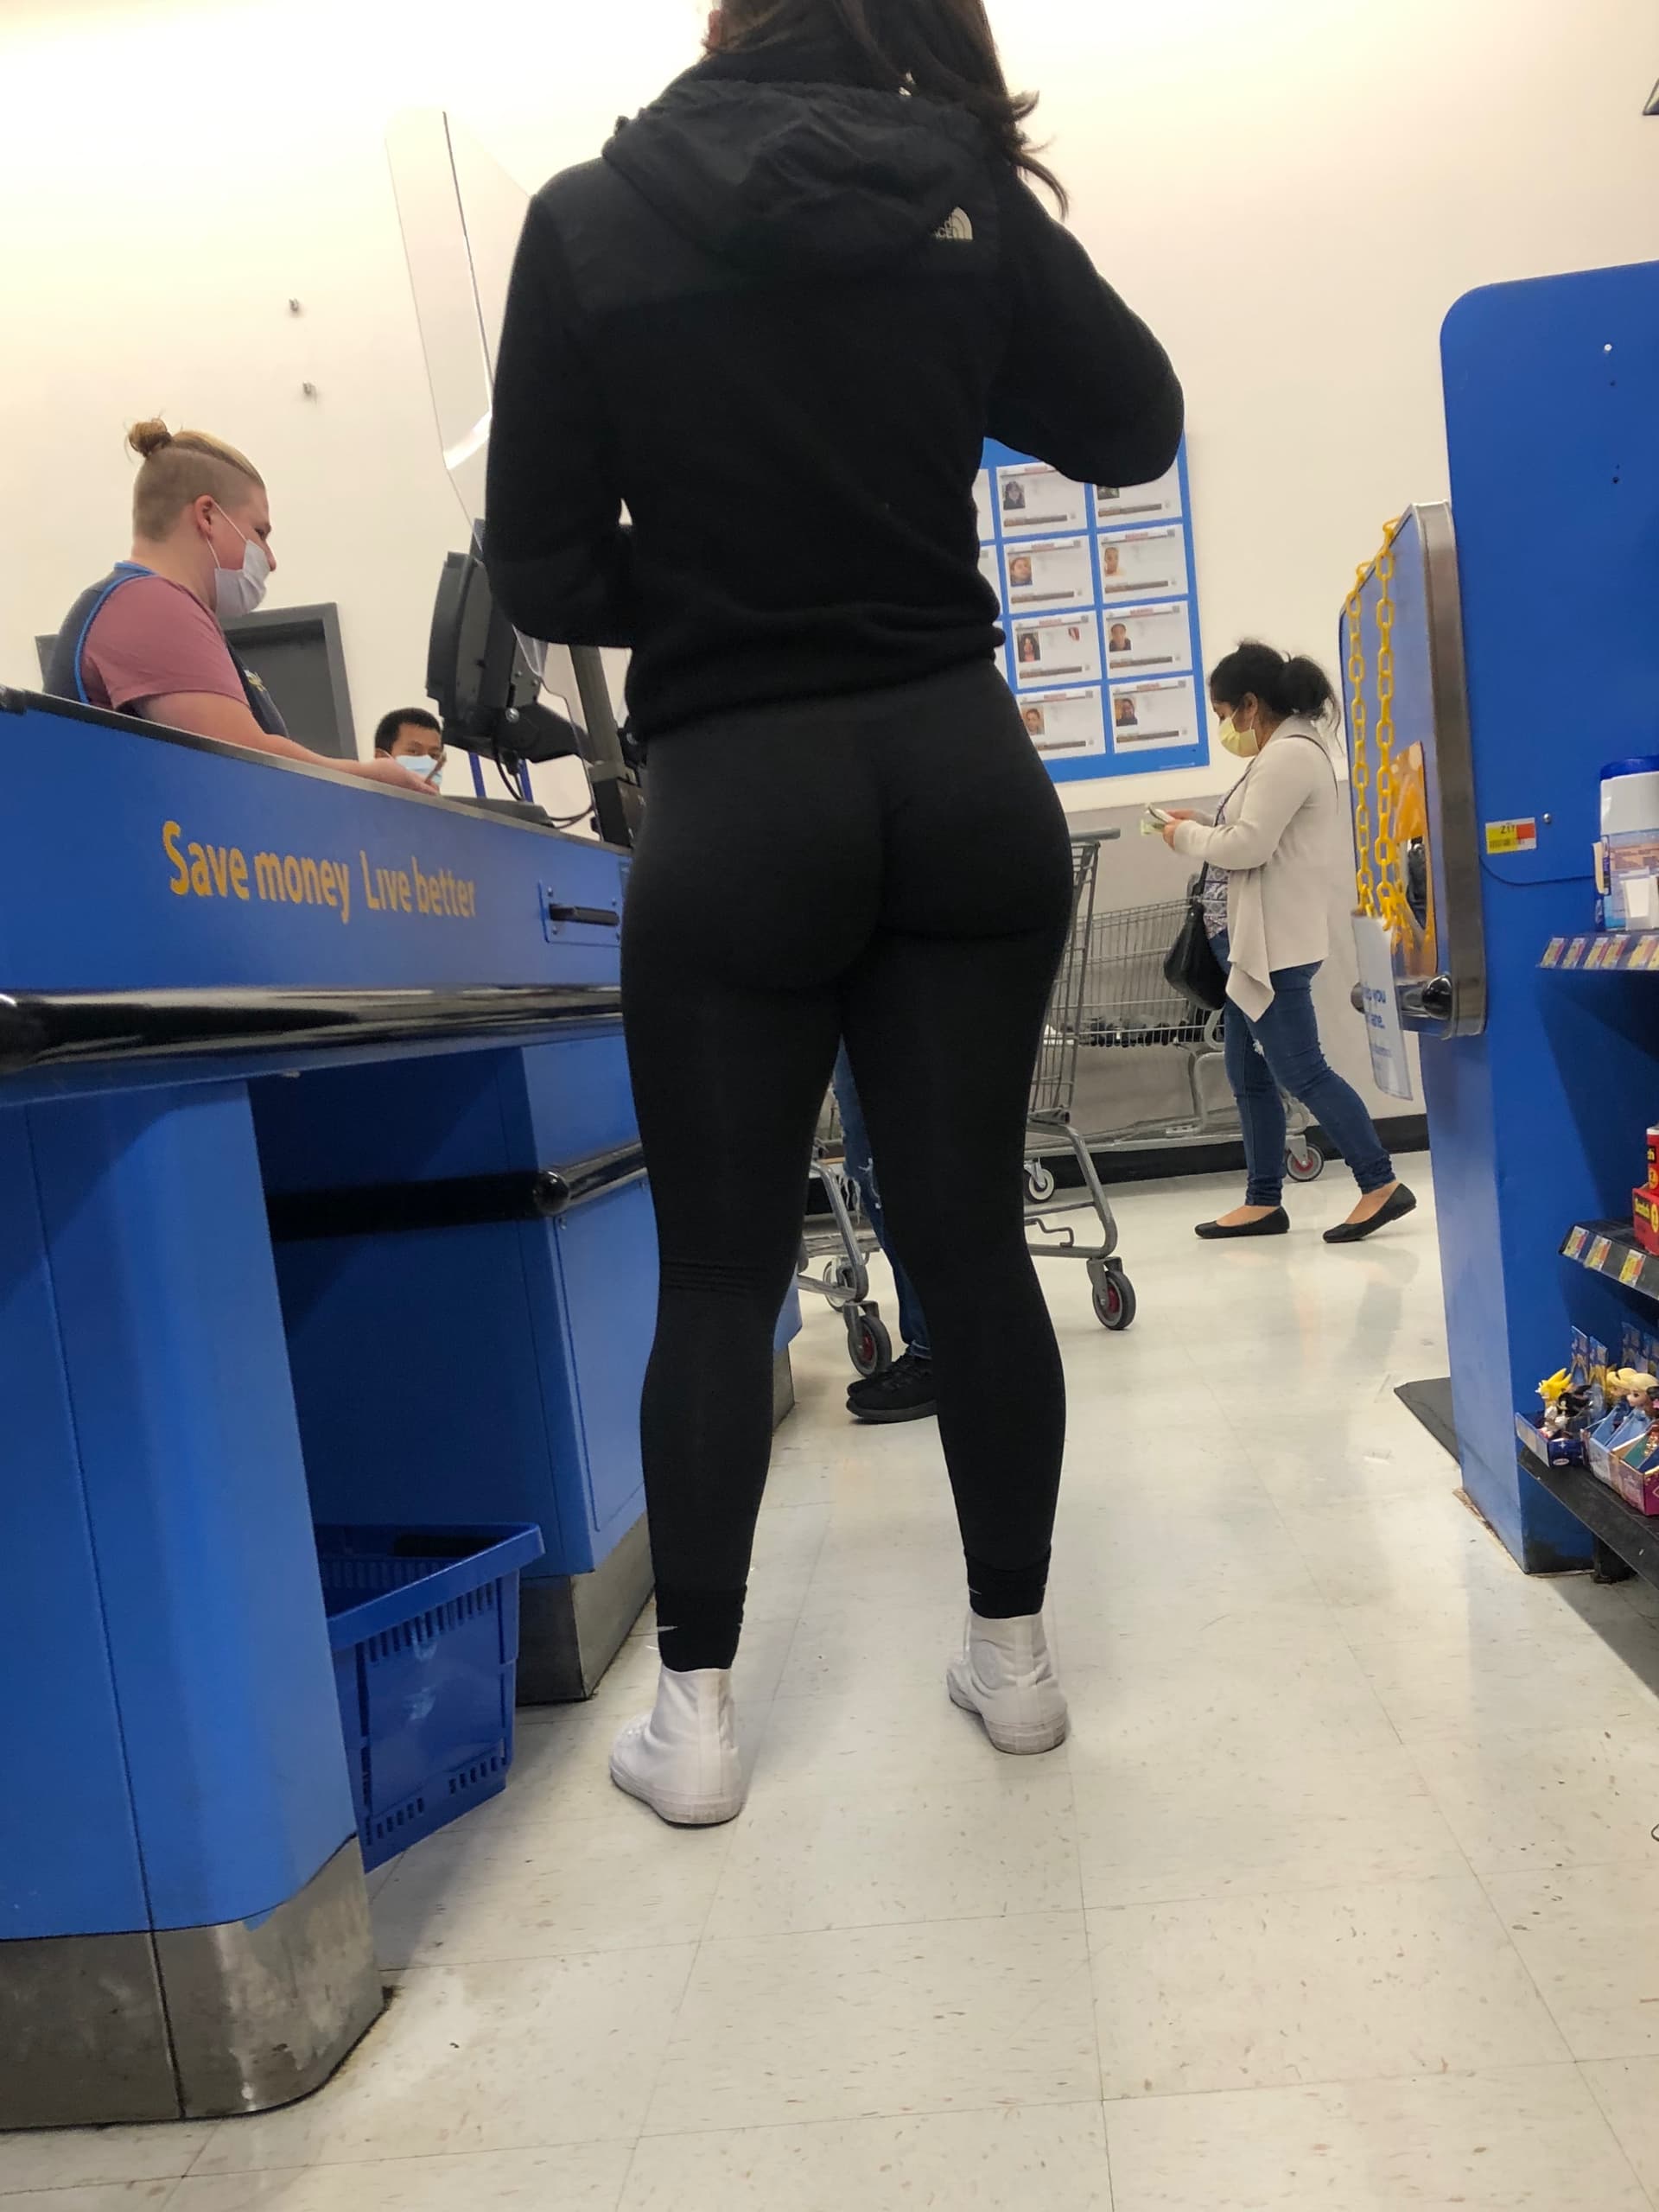 Spandex Wedgie Ass Booty